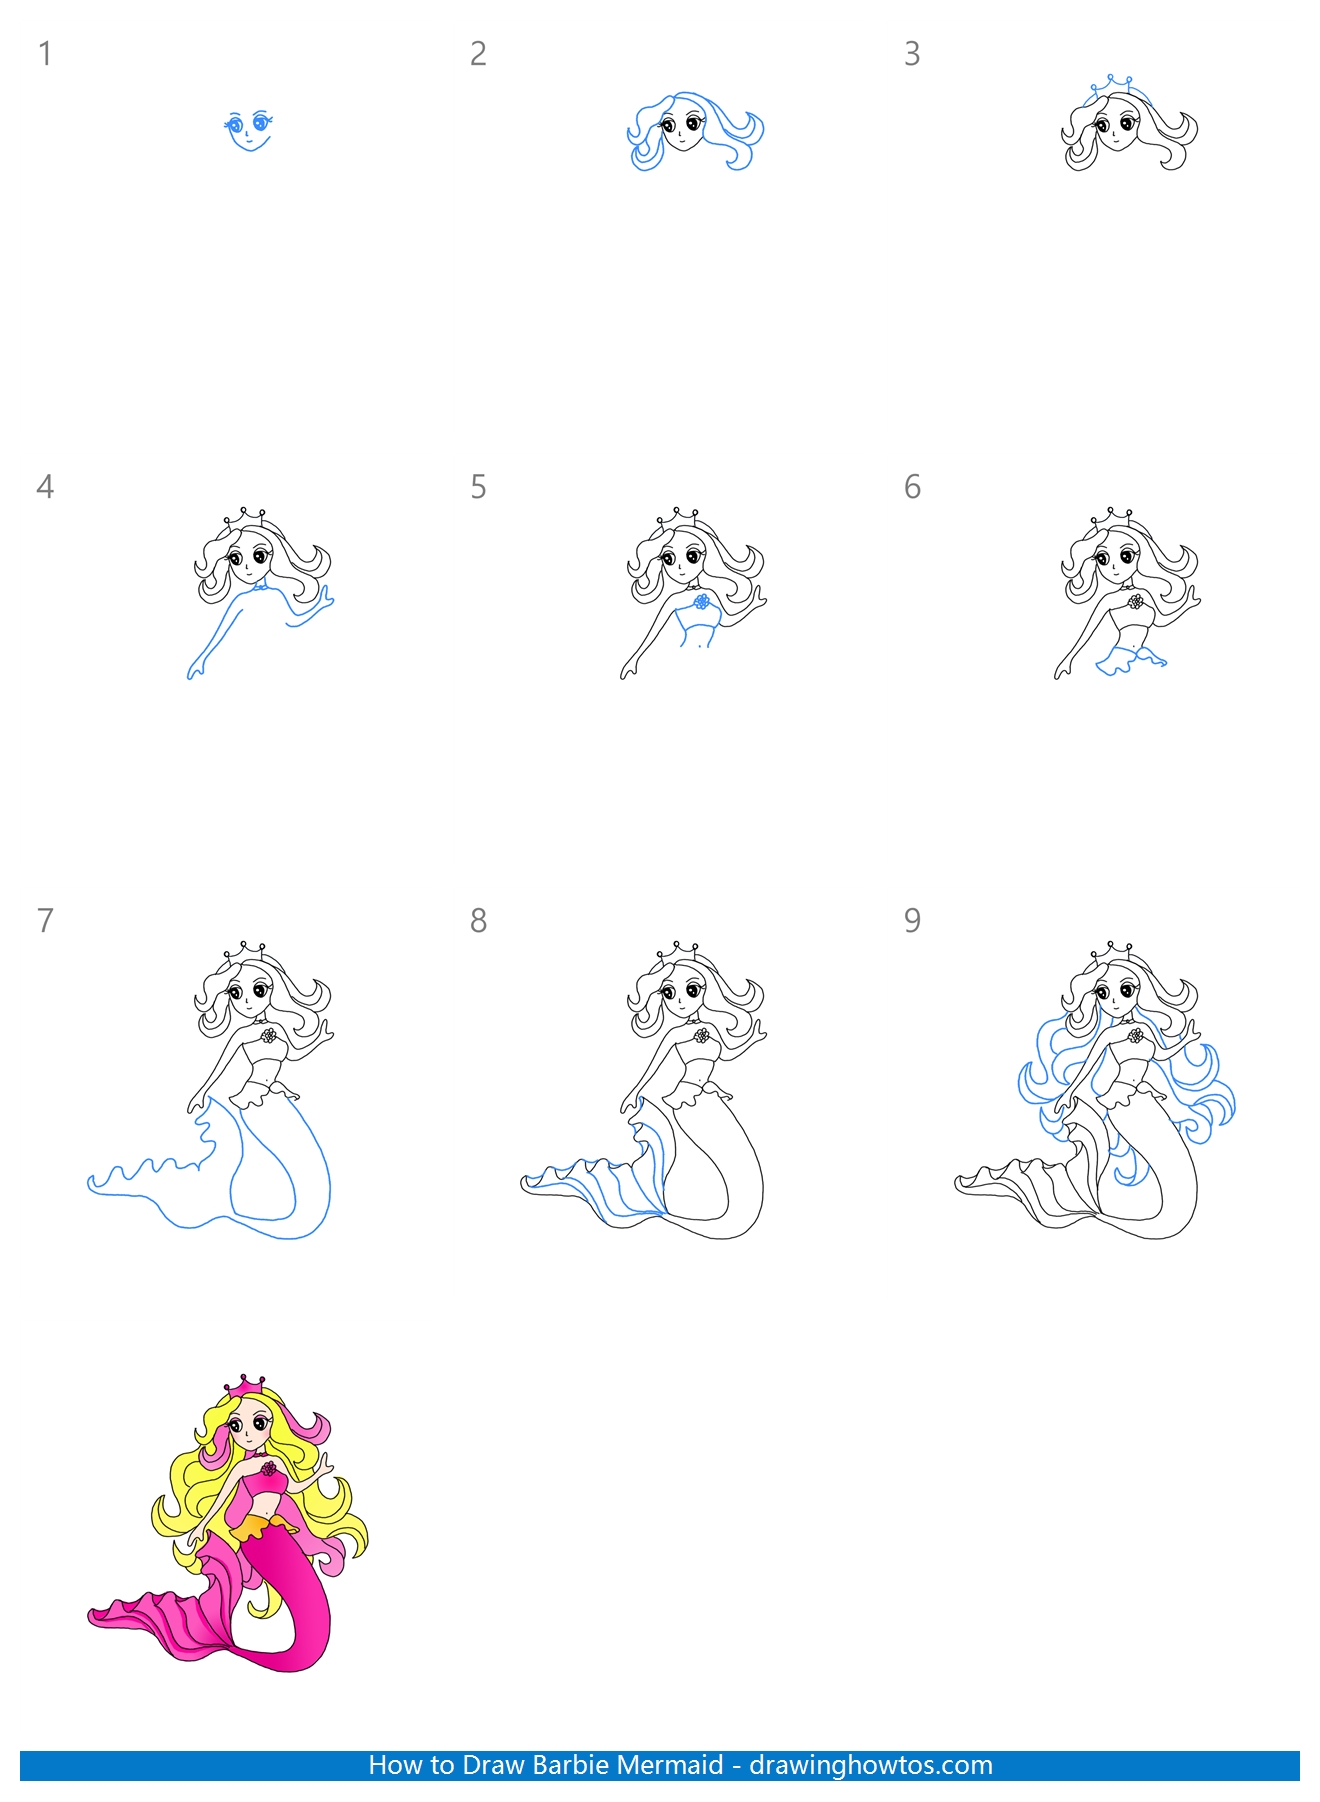 How to Draw a Barbie Mermaid Step by Step